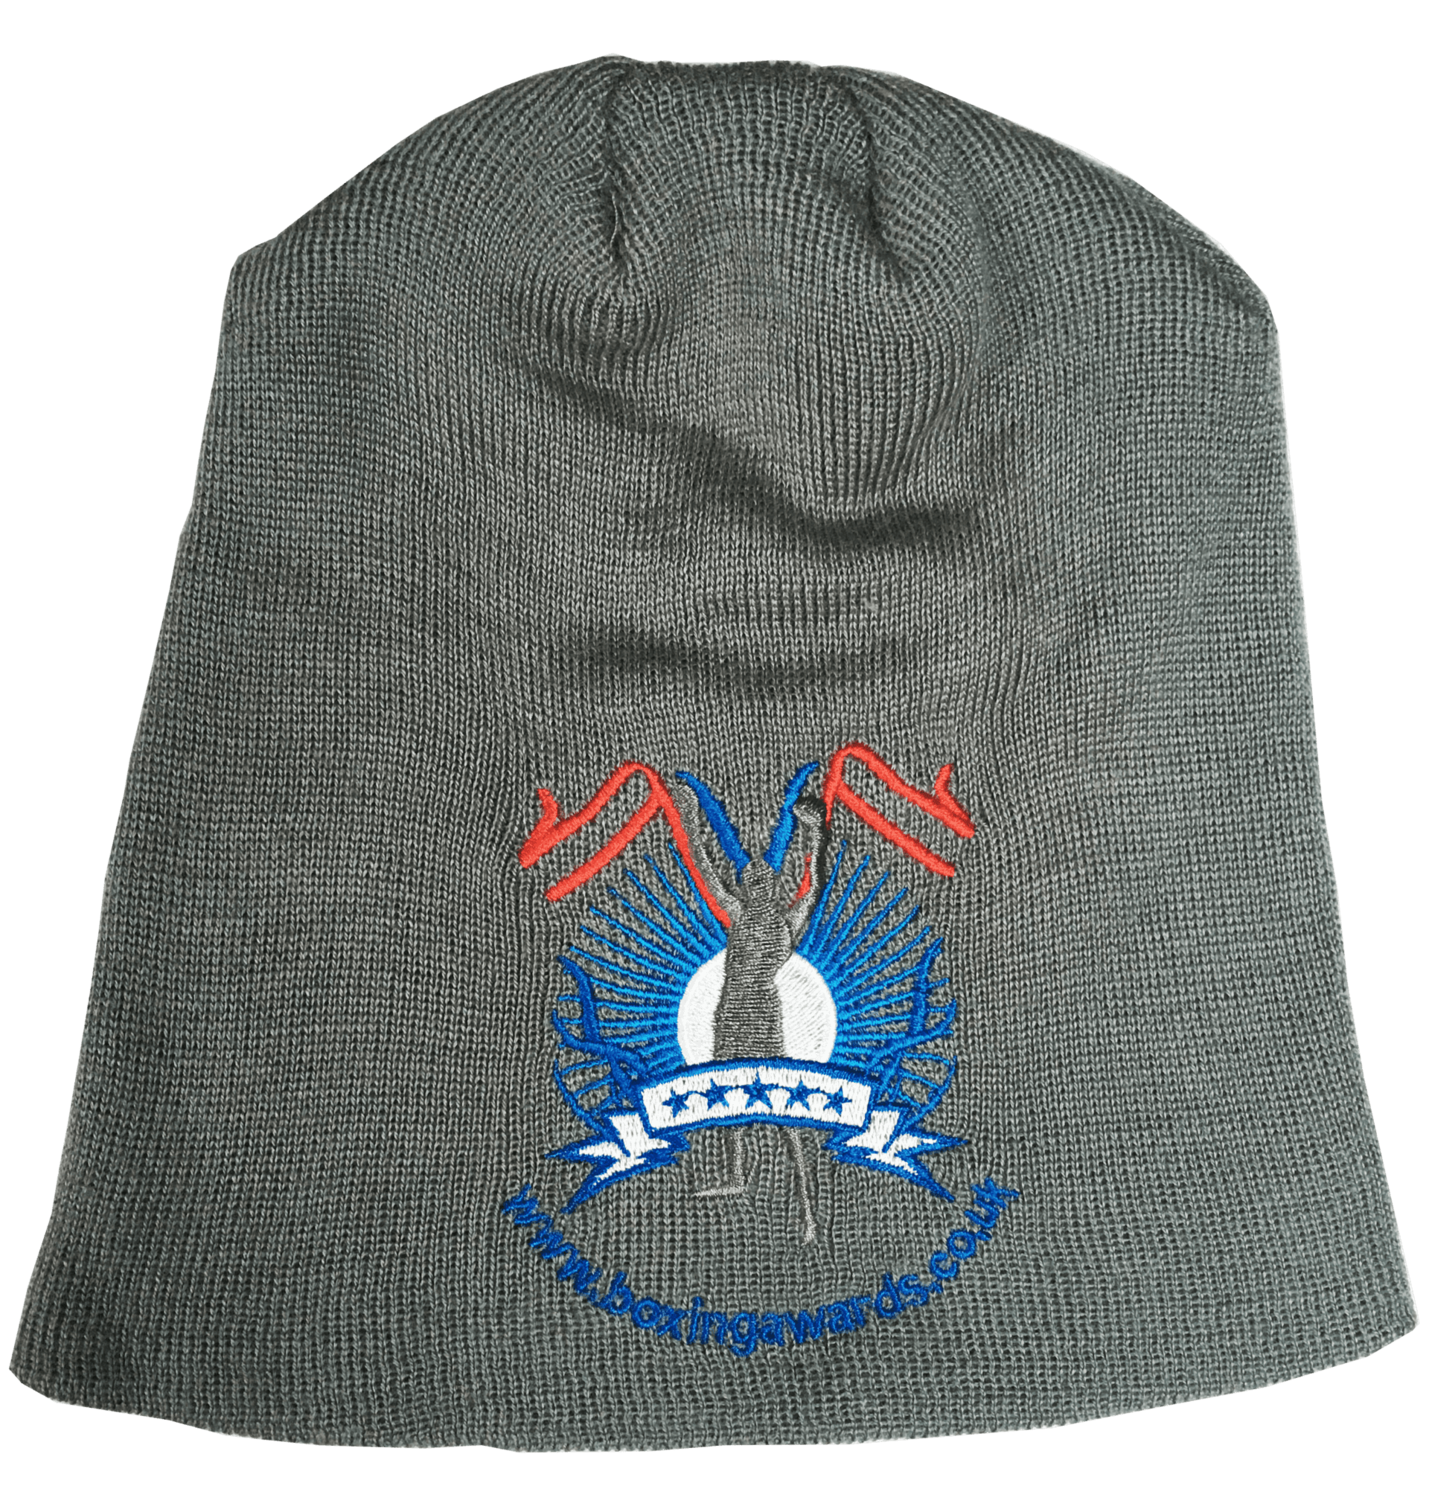 Boxing Awards Beanie Hat